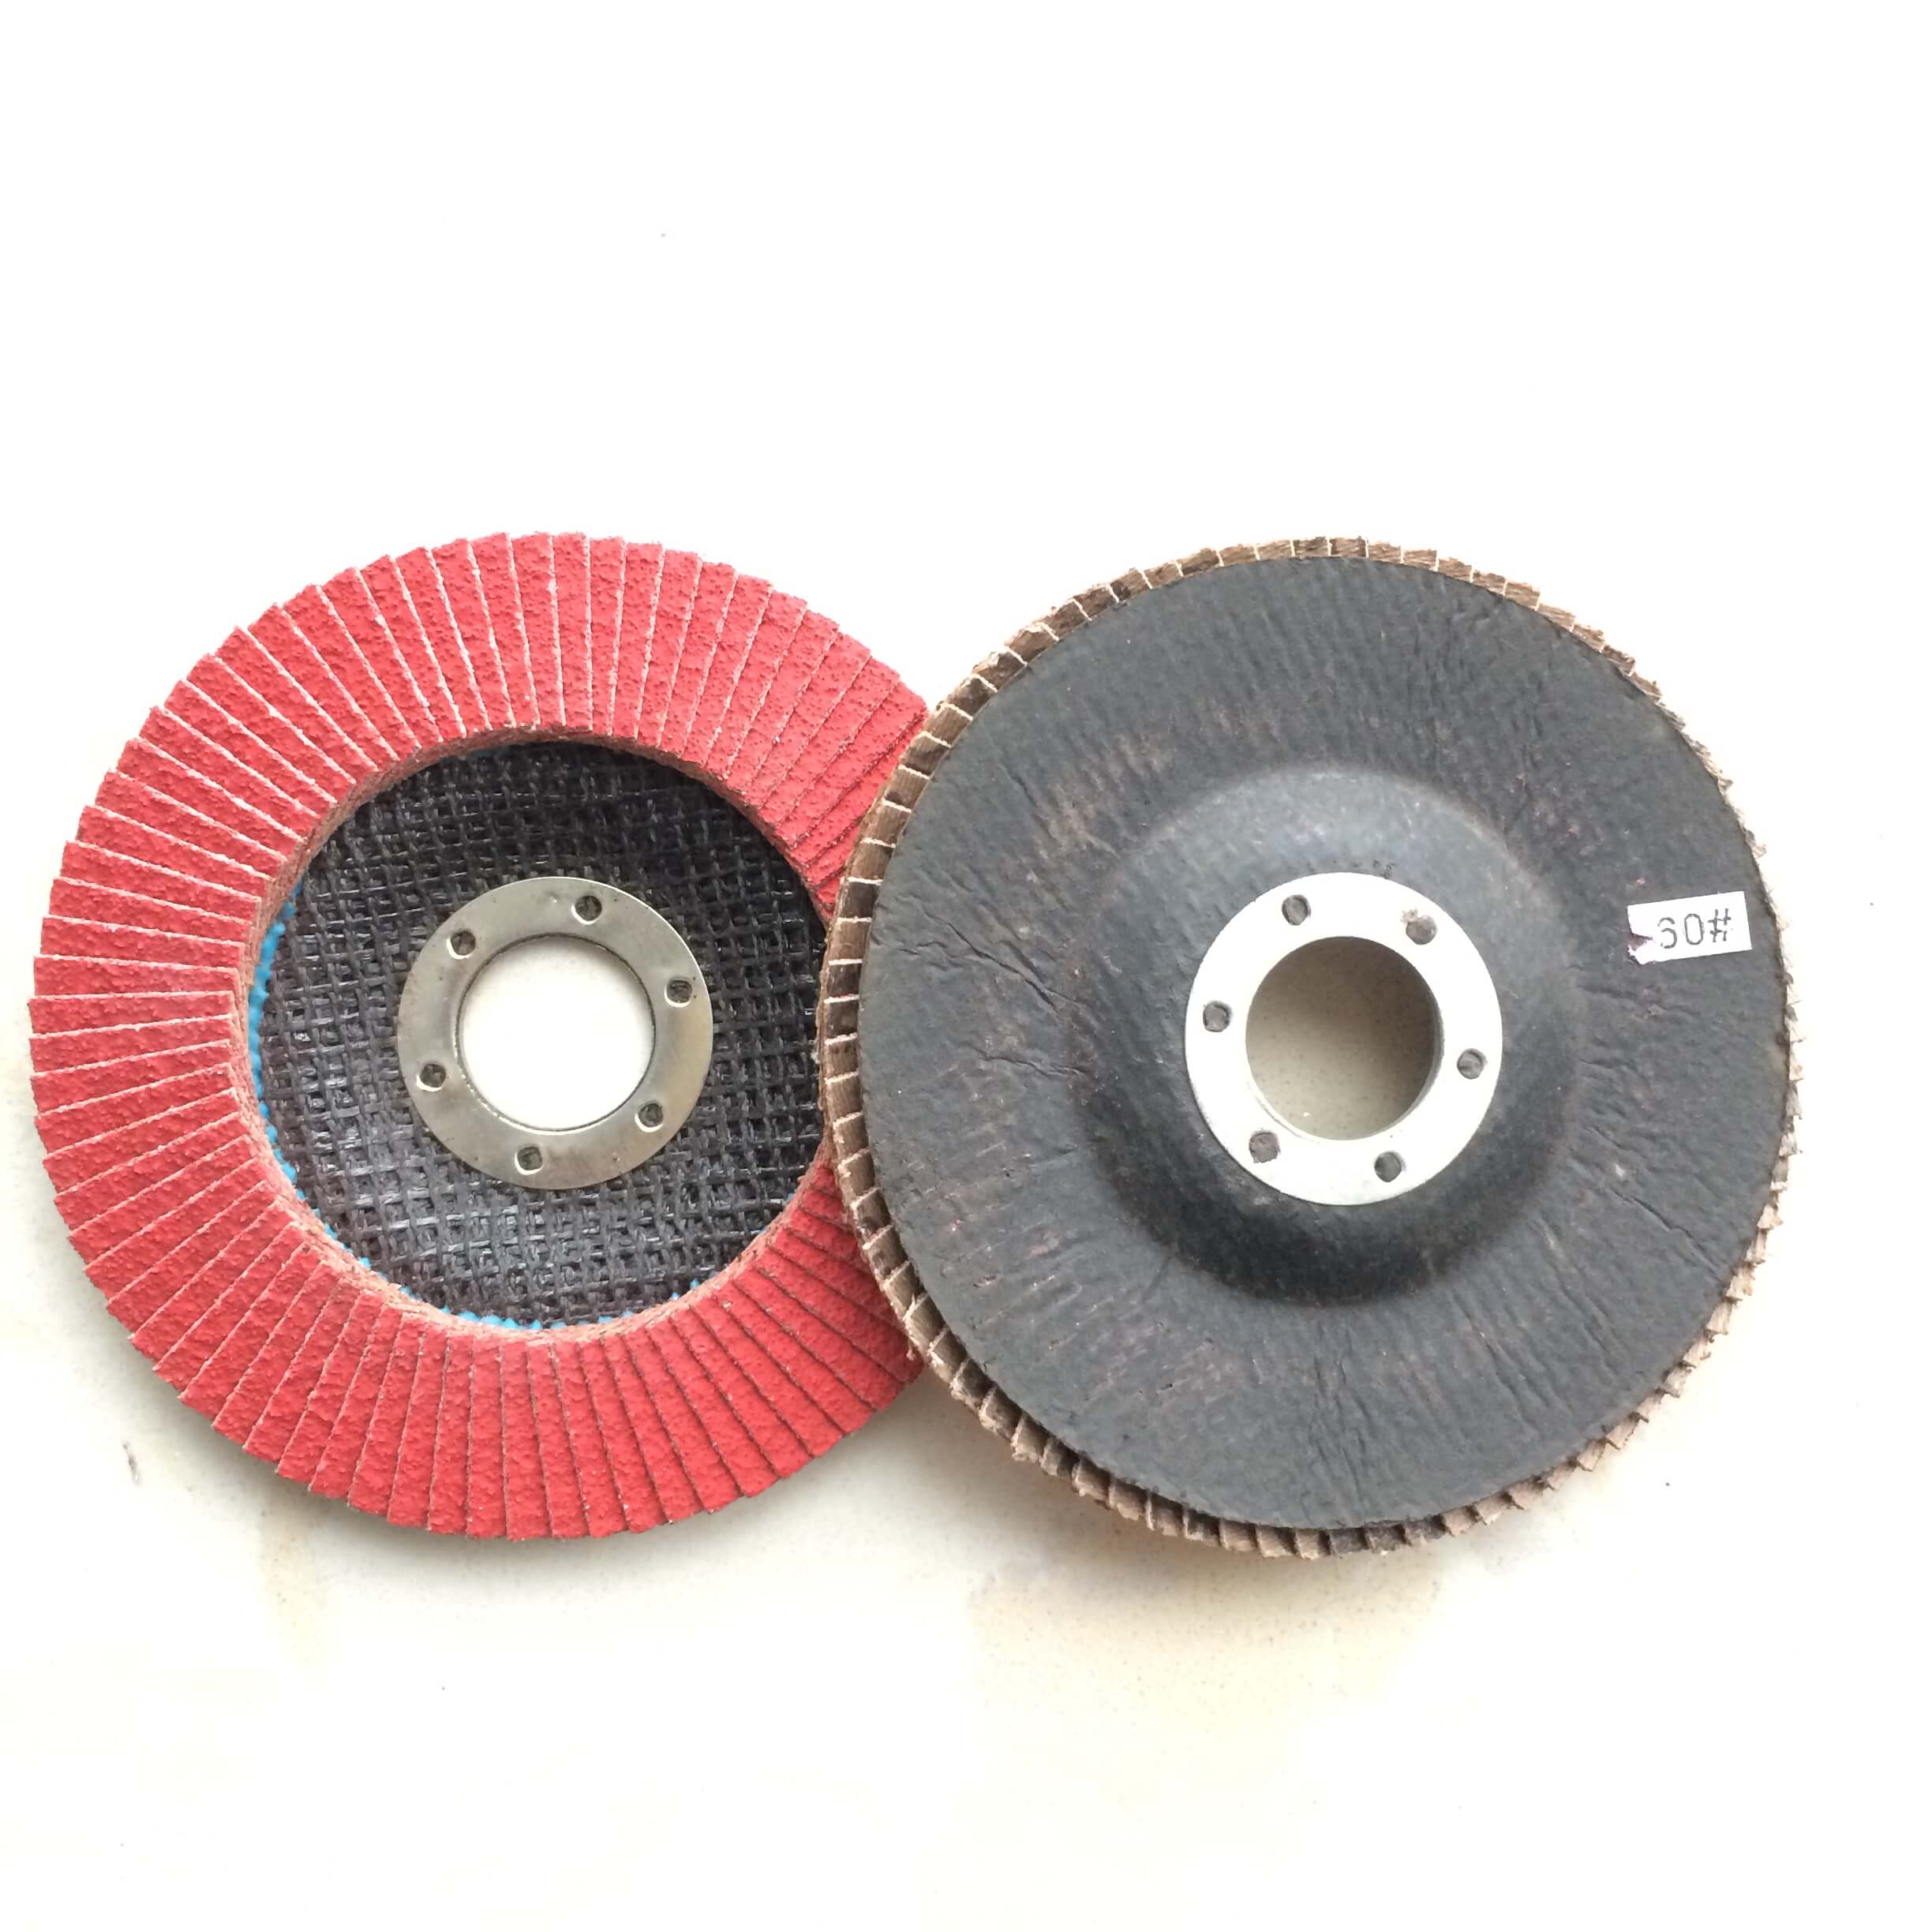 Ceramic flap disc grinding problems and solutions_flap disc 4 inch_ceramic flap disc_flap disc for stainless steel